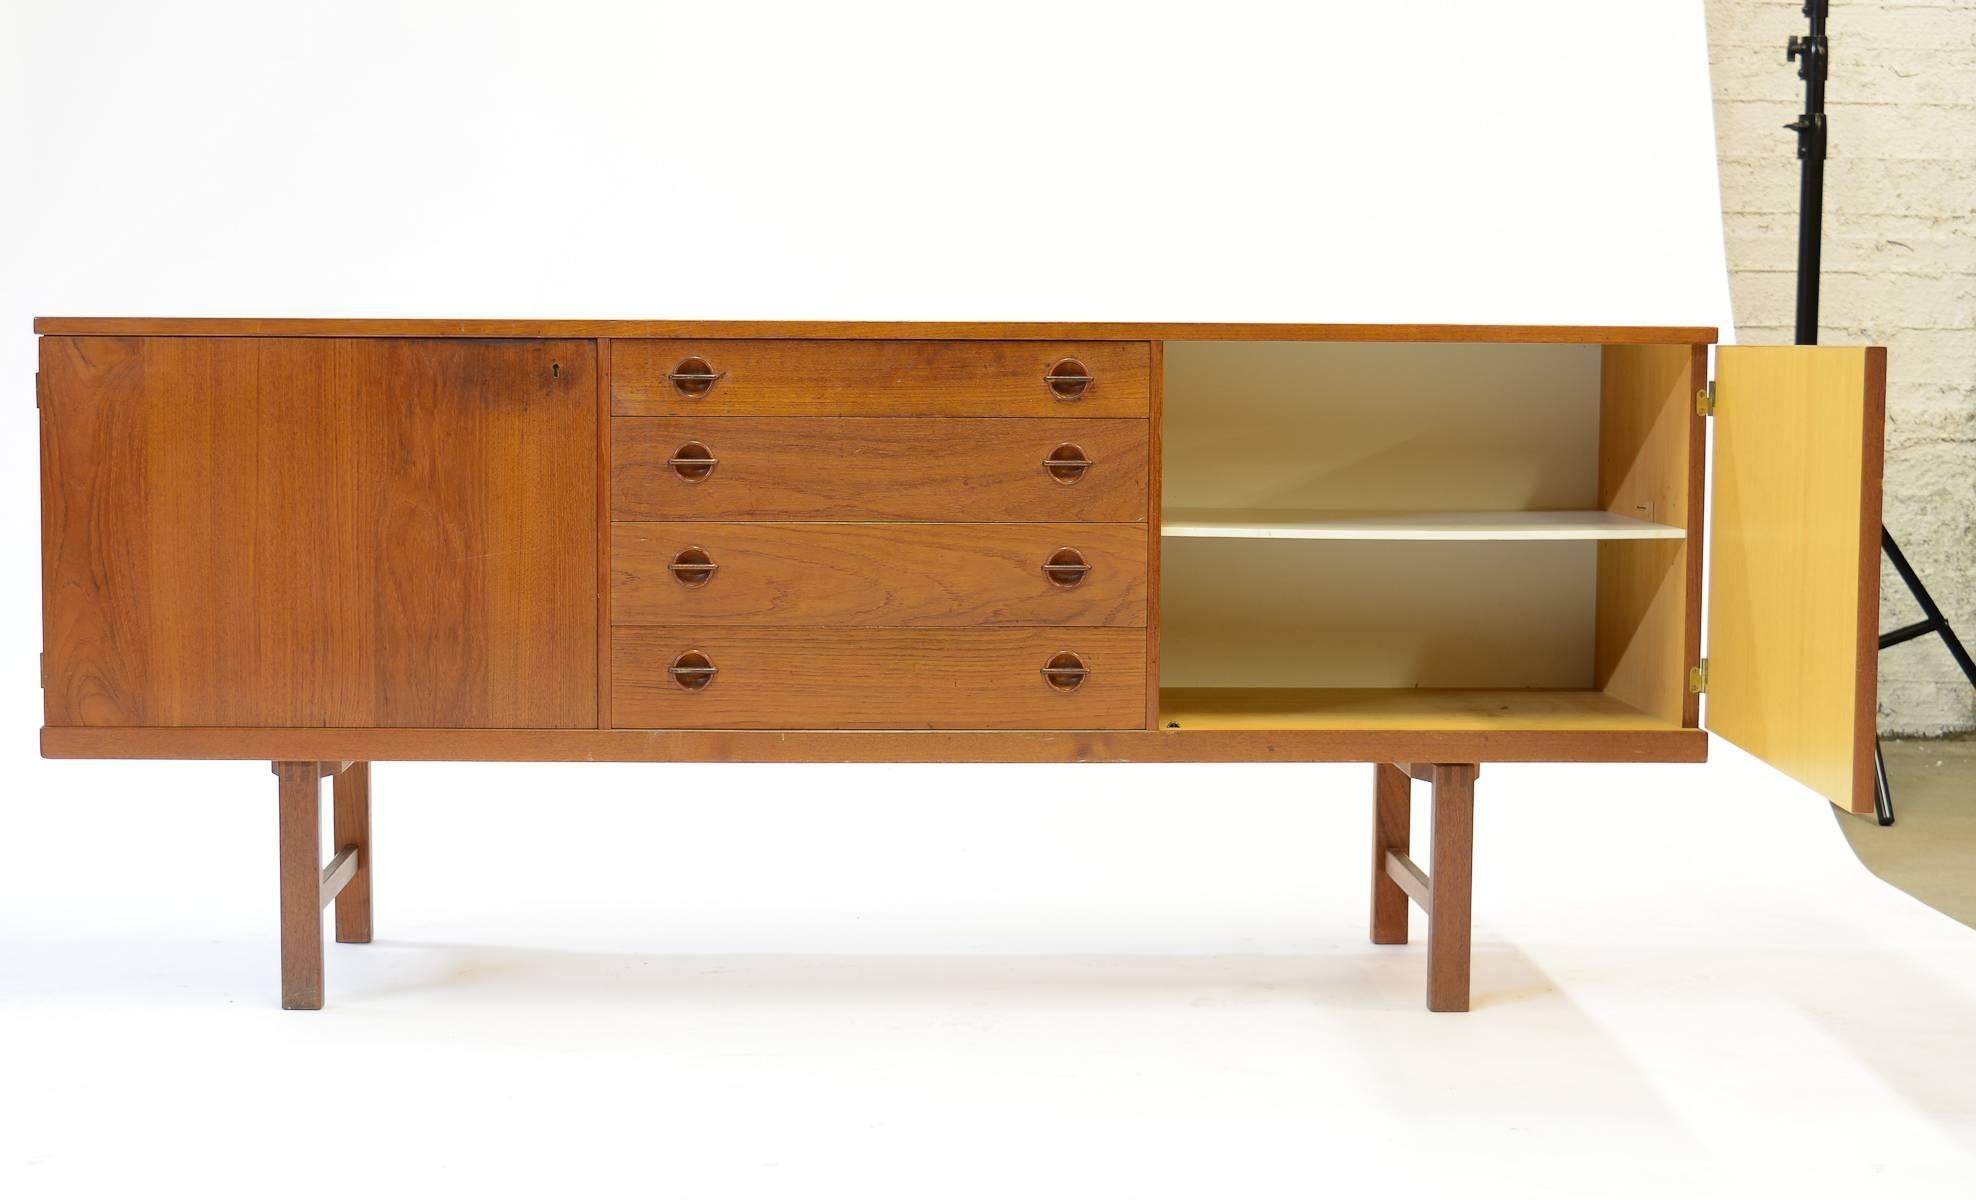 An exceptional Danish teak credenza with elegant circular drawer pulls on four stacked center drawers and an adjustable shelf in each of the left and right compartments.

